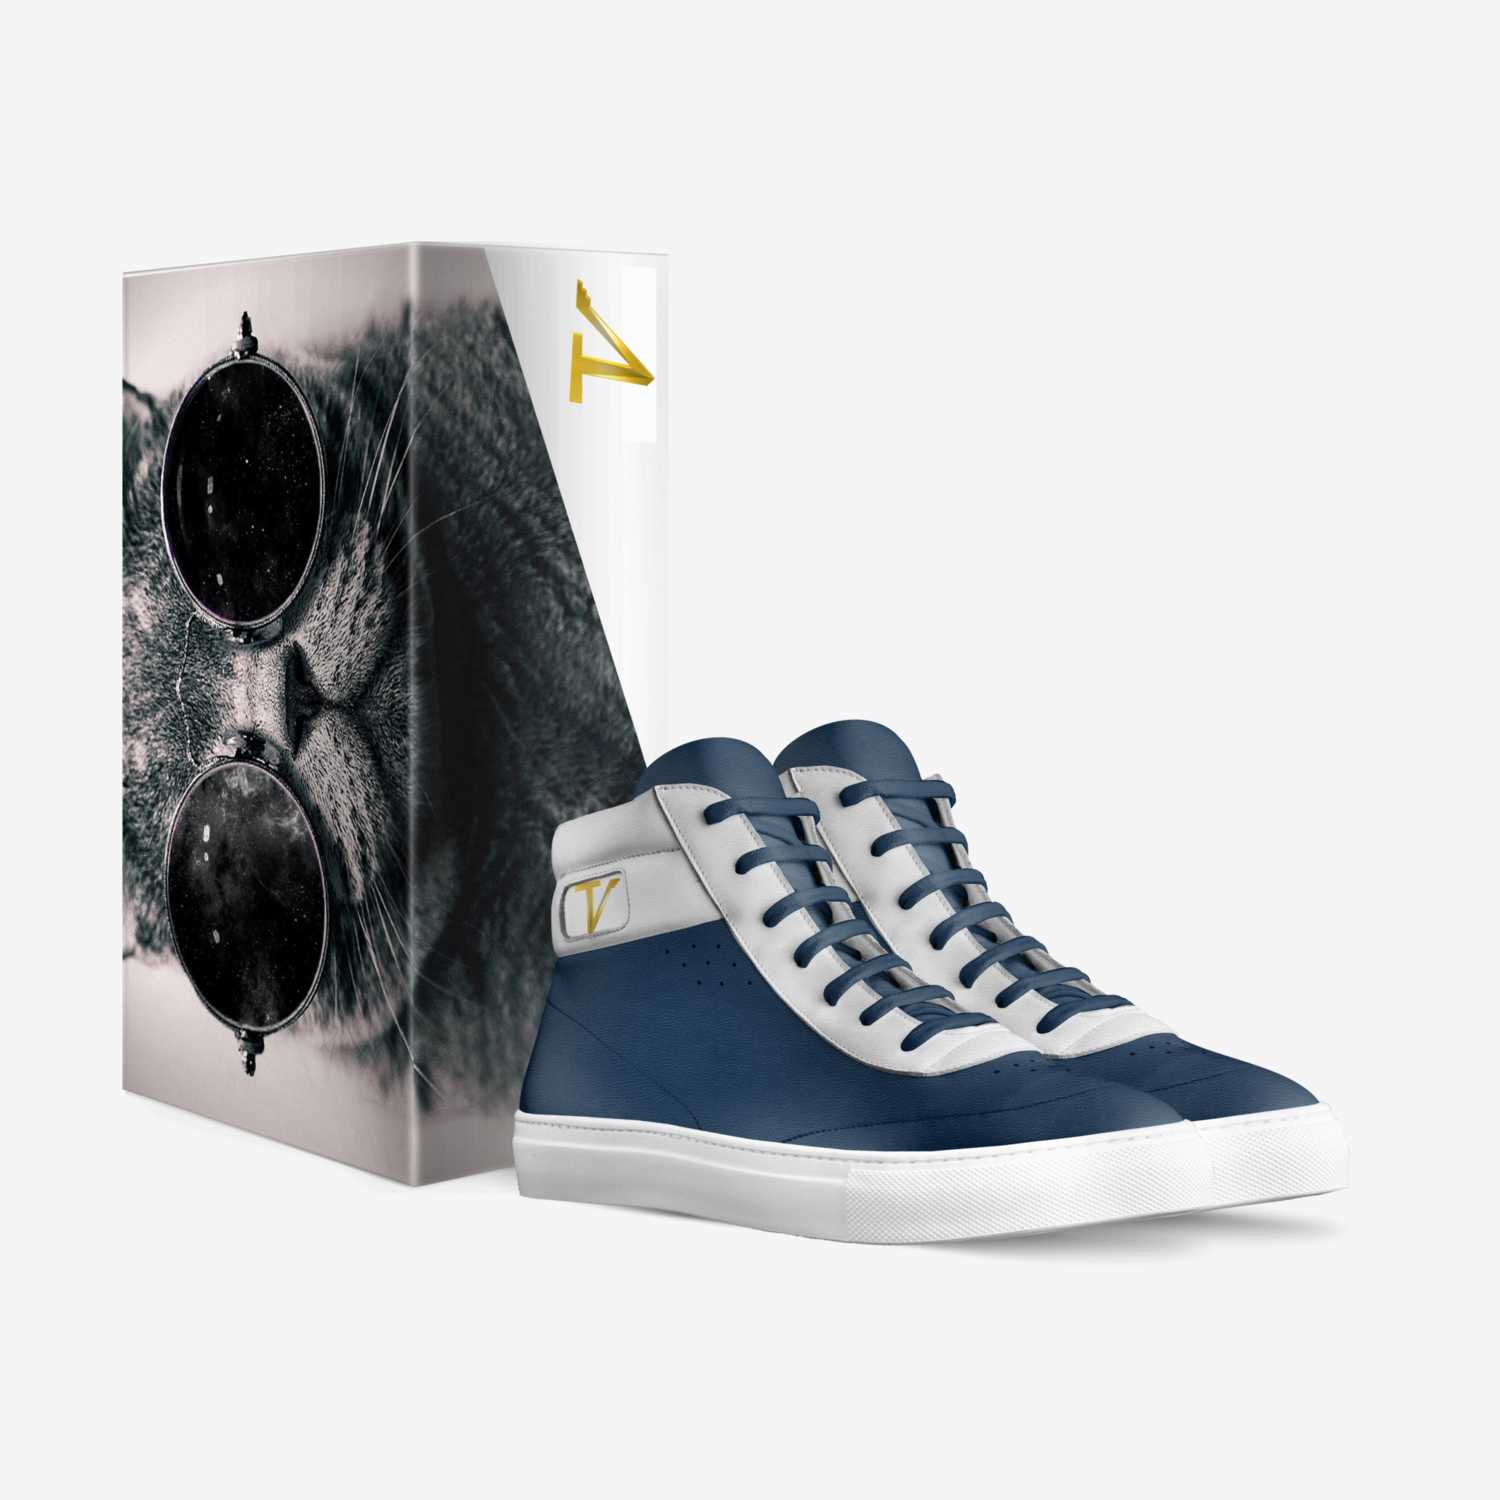 Criterion Blue custom made in Italy shoes by Lamont Sanders | Box view